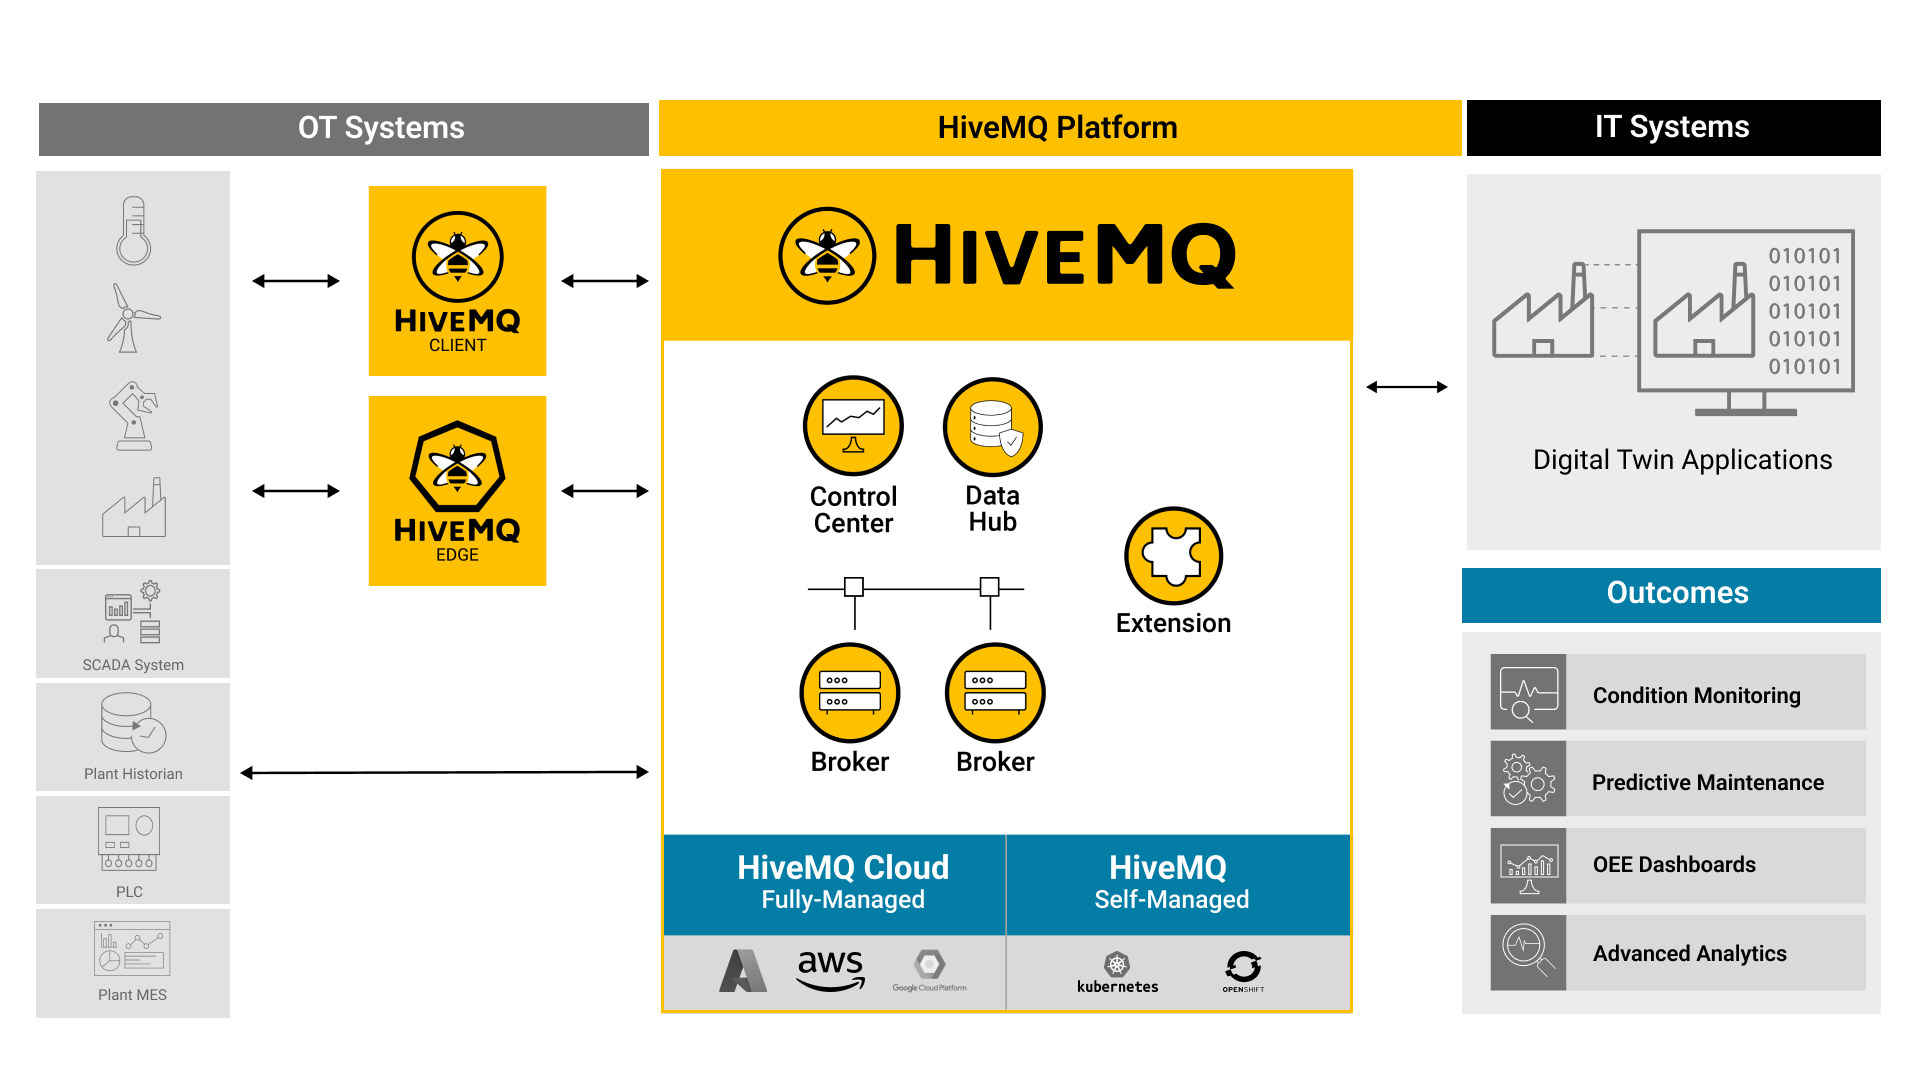 How Does HiveMQ Enable Digital Twins?